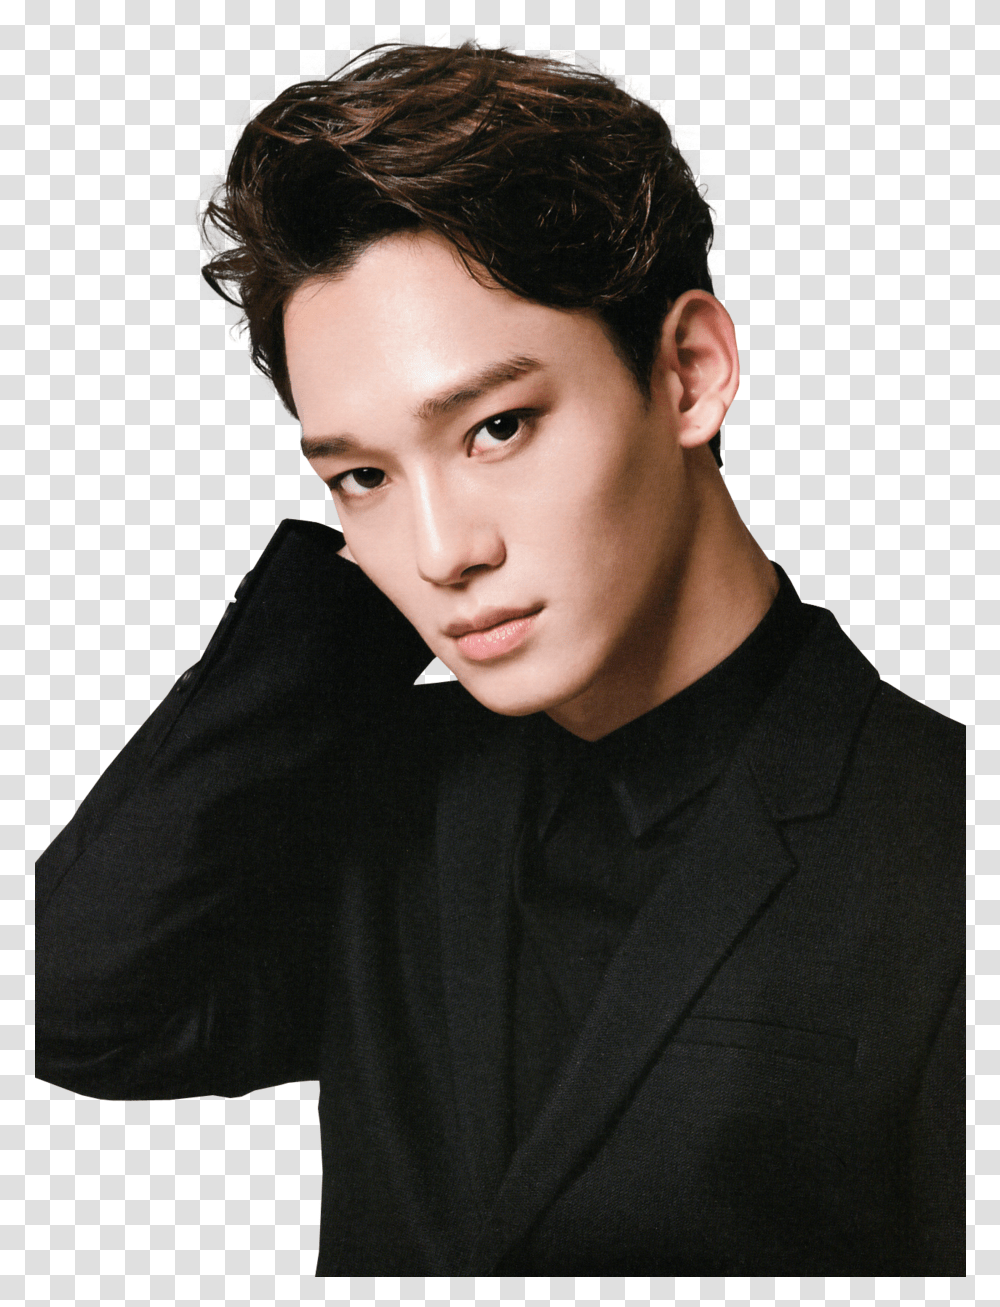 Chen Exo And Jongdae Image Kim Jong Dae 2018, Person, Performer, Face Transparent Png